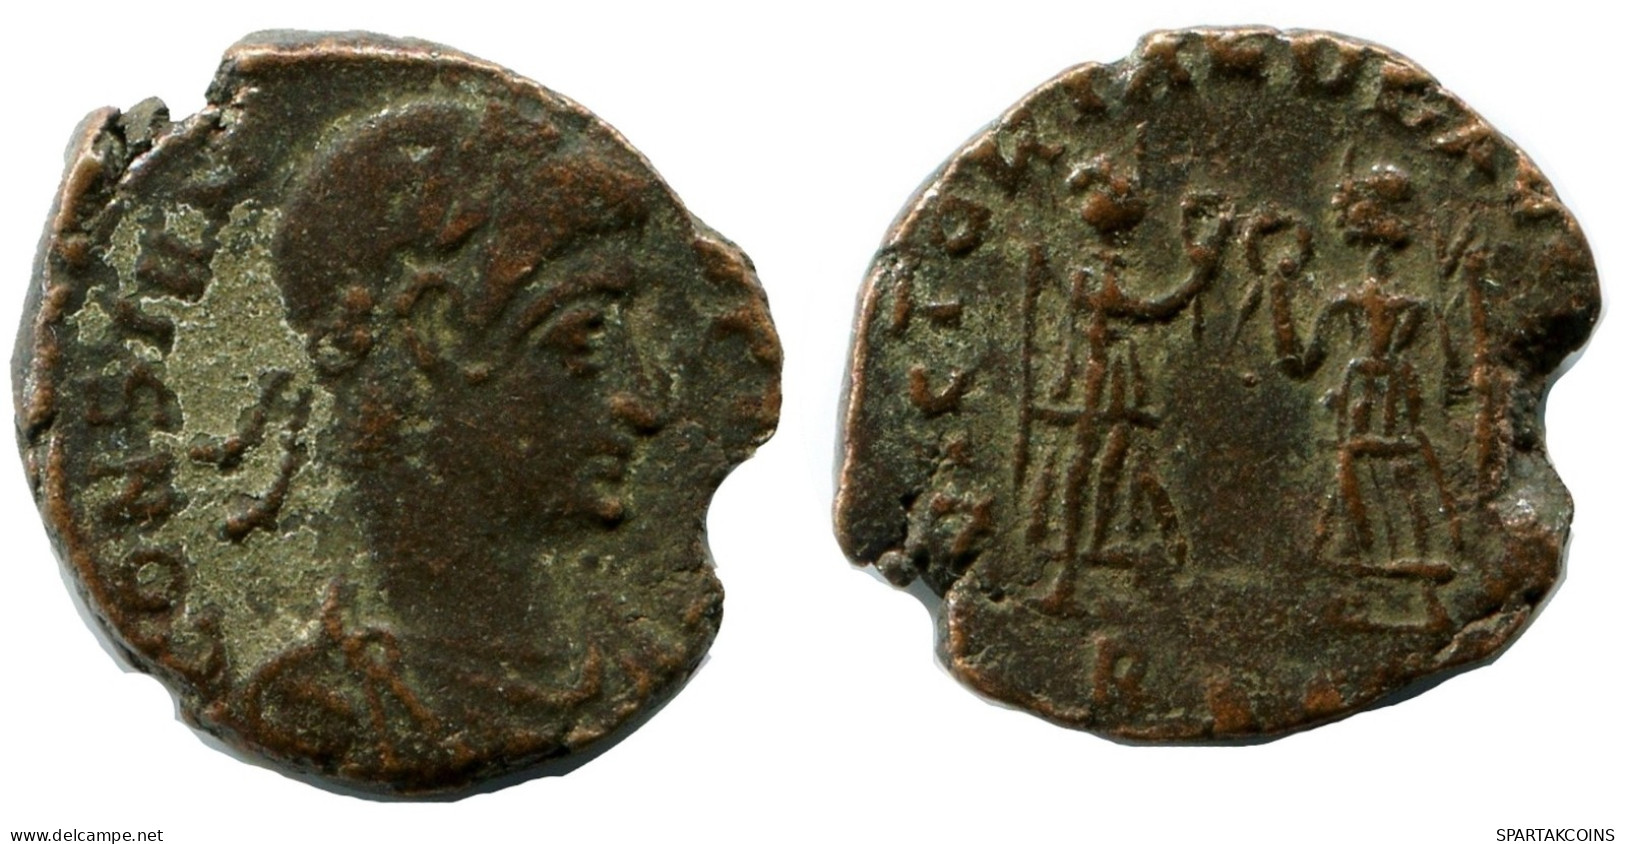 CONSTANS MINTED IN ROME ITALY FROM THE ROYAL ONTARIO MUSEUM #ANC11528.14.U.A - L'Empire Chrétien (307 à 363)